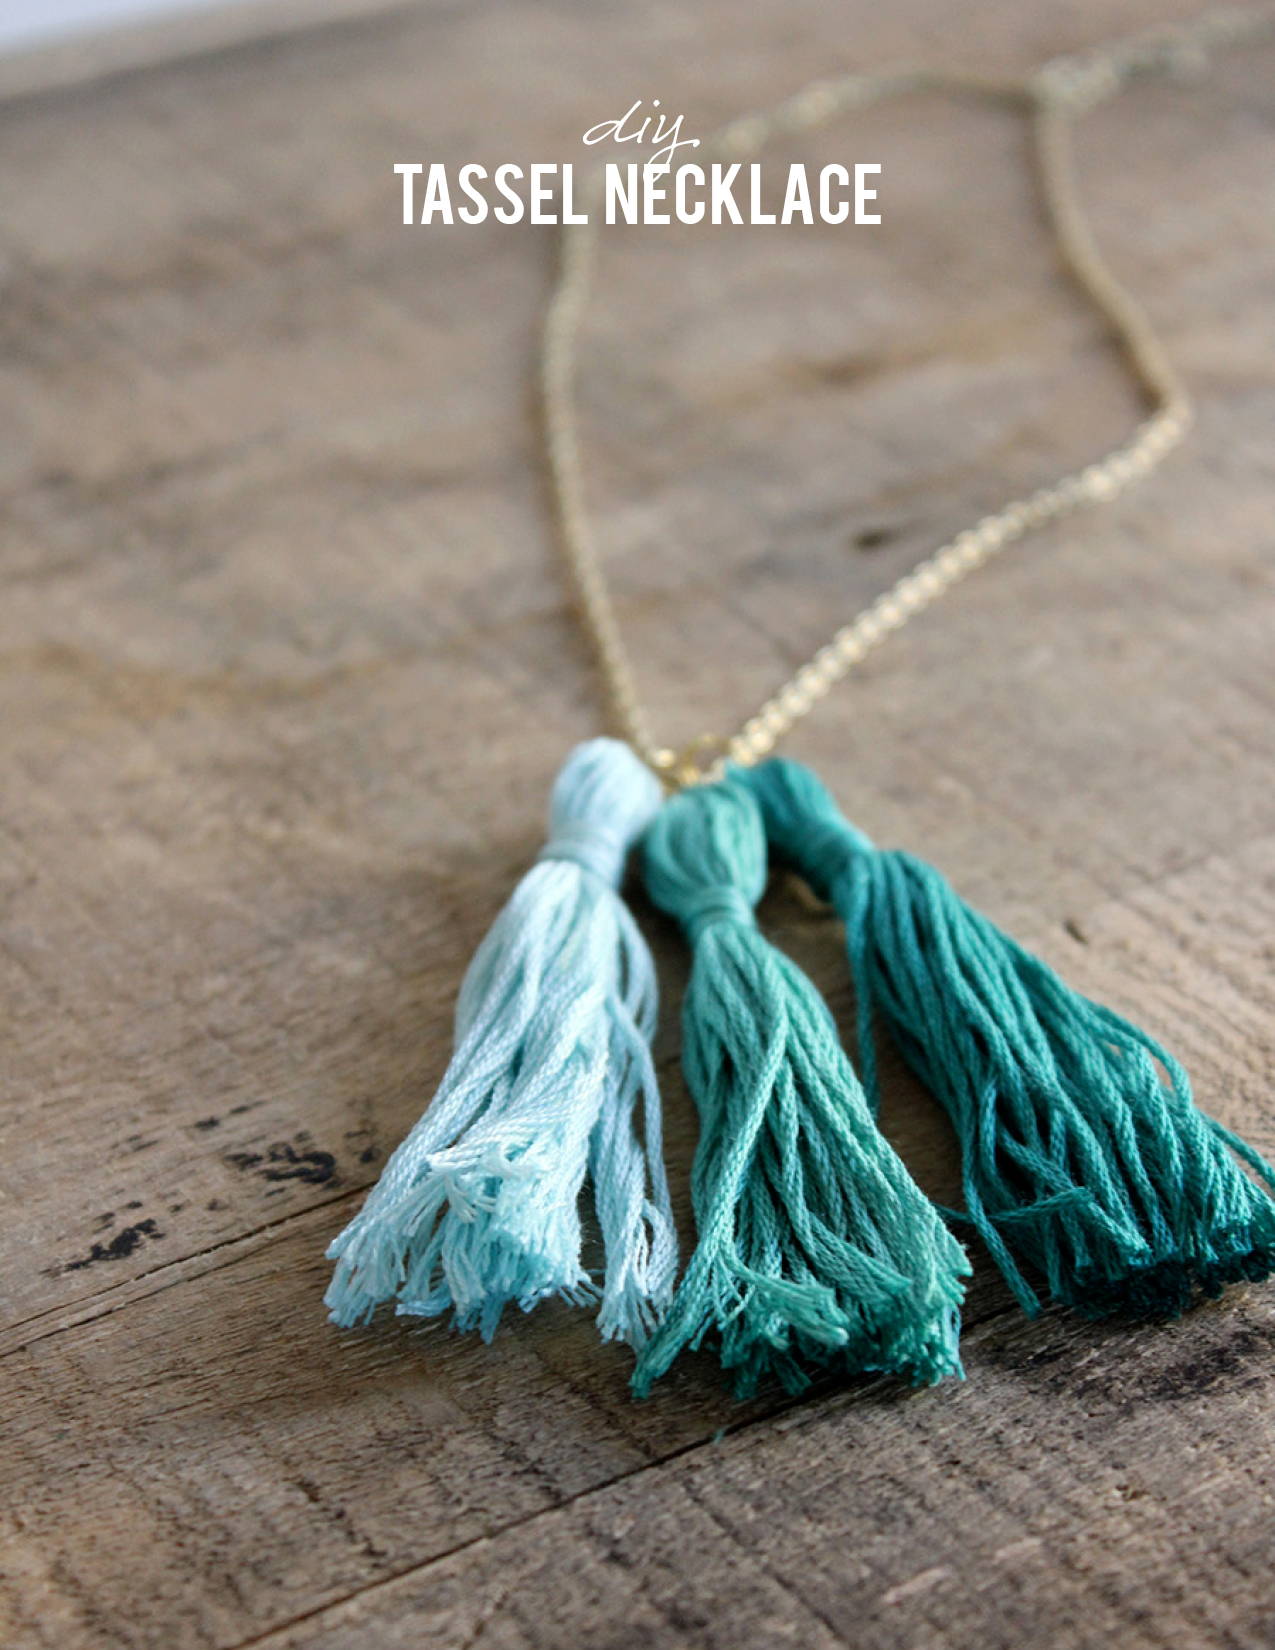 10 Minute DIY Tassel Necklace - Alice and Lois